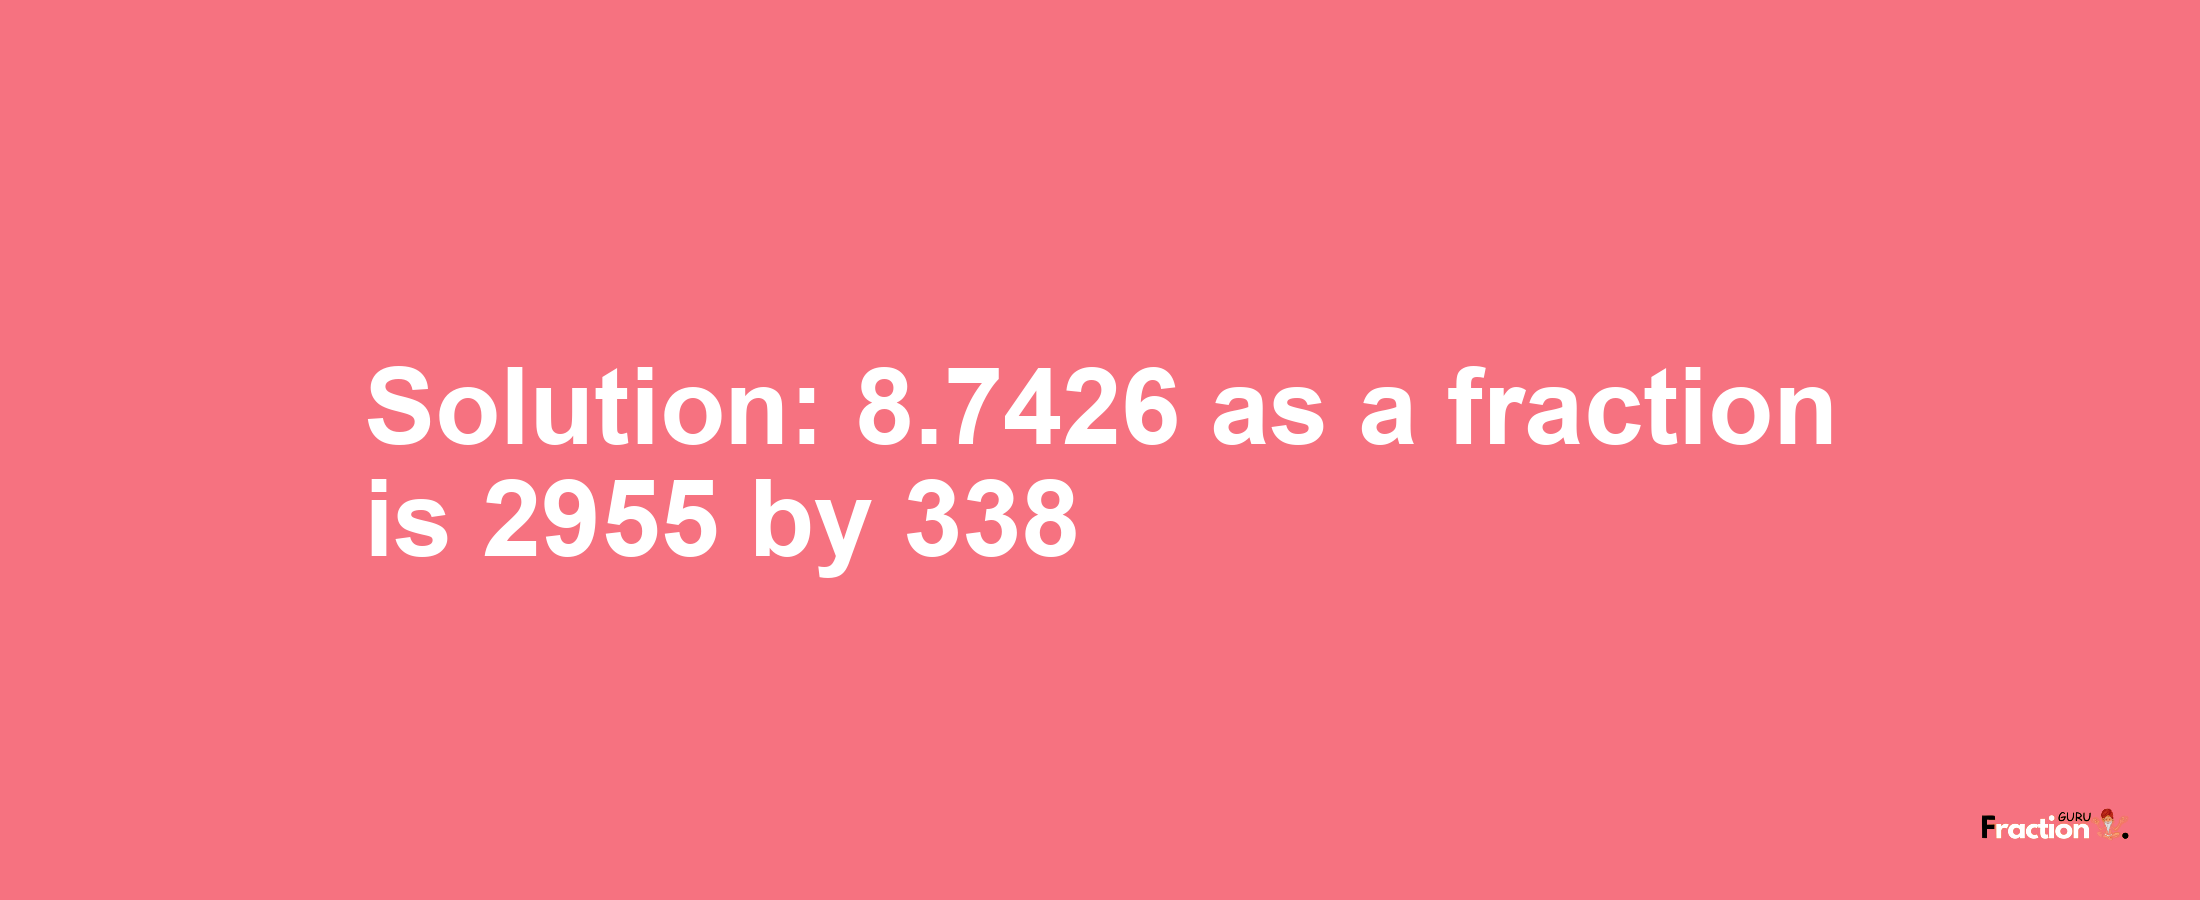 Solution:8.7426 as a fraction is 2955/338